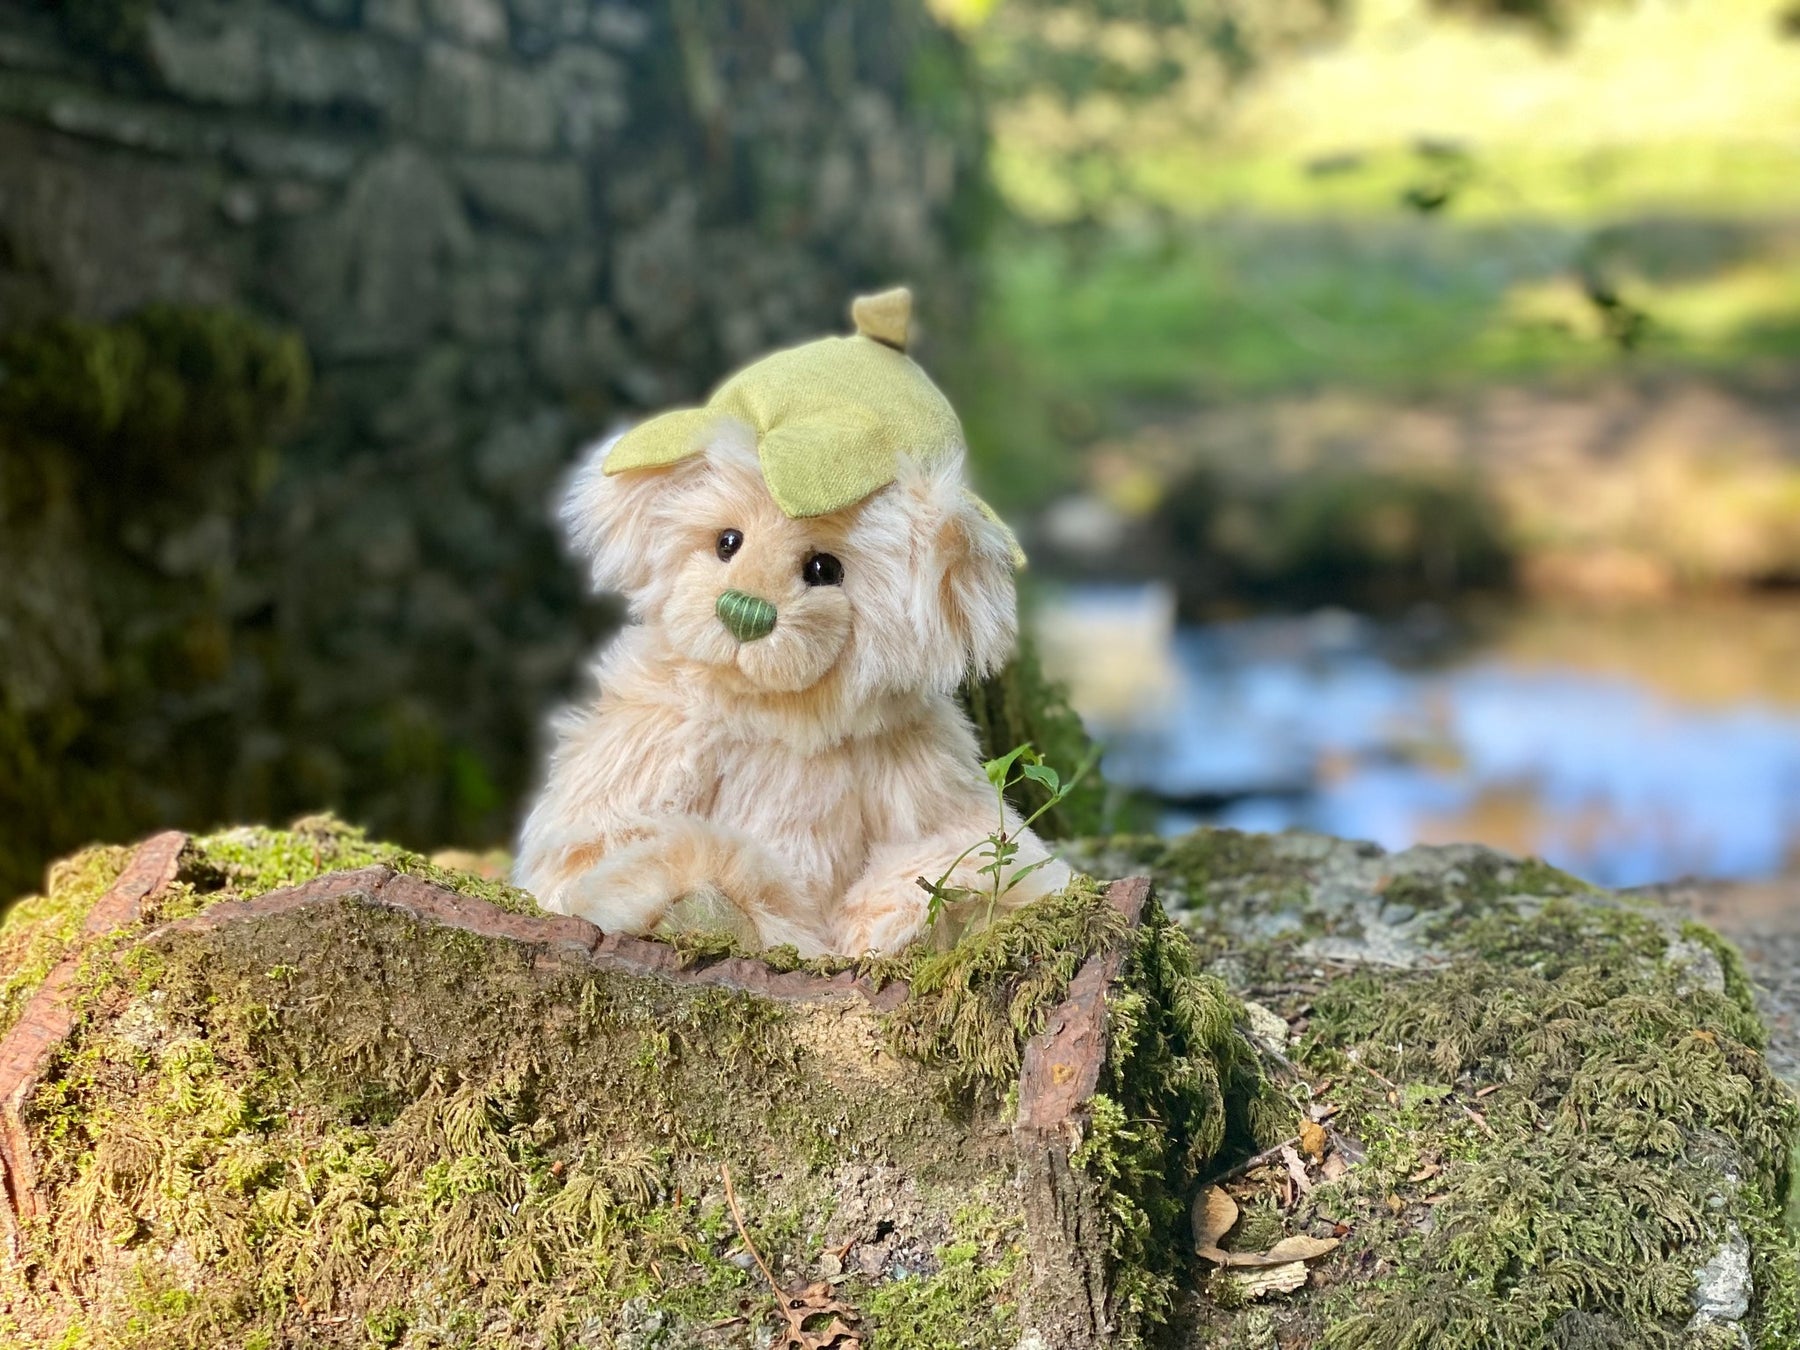 Collectable Bears and Characters - Charlie Bears Stockist